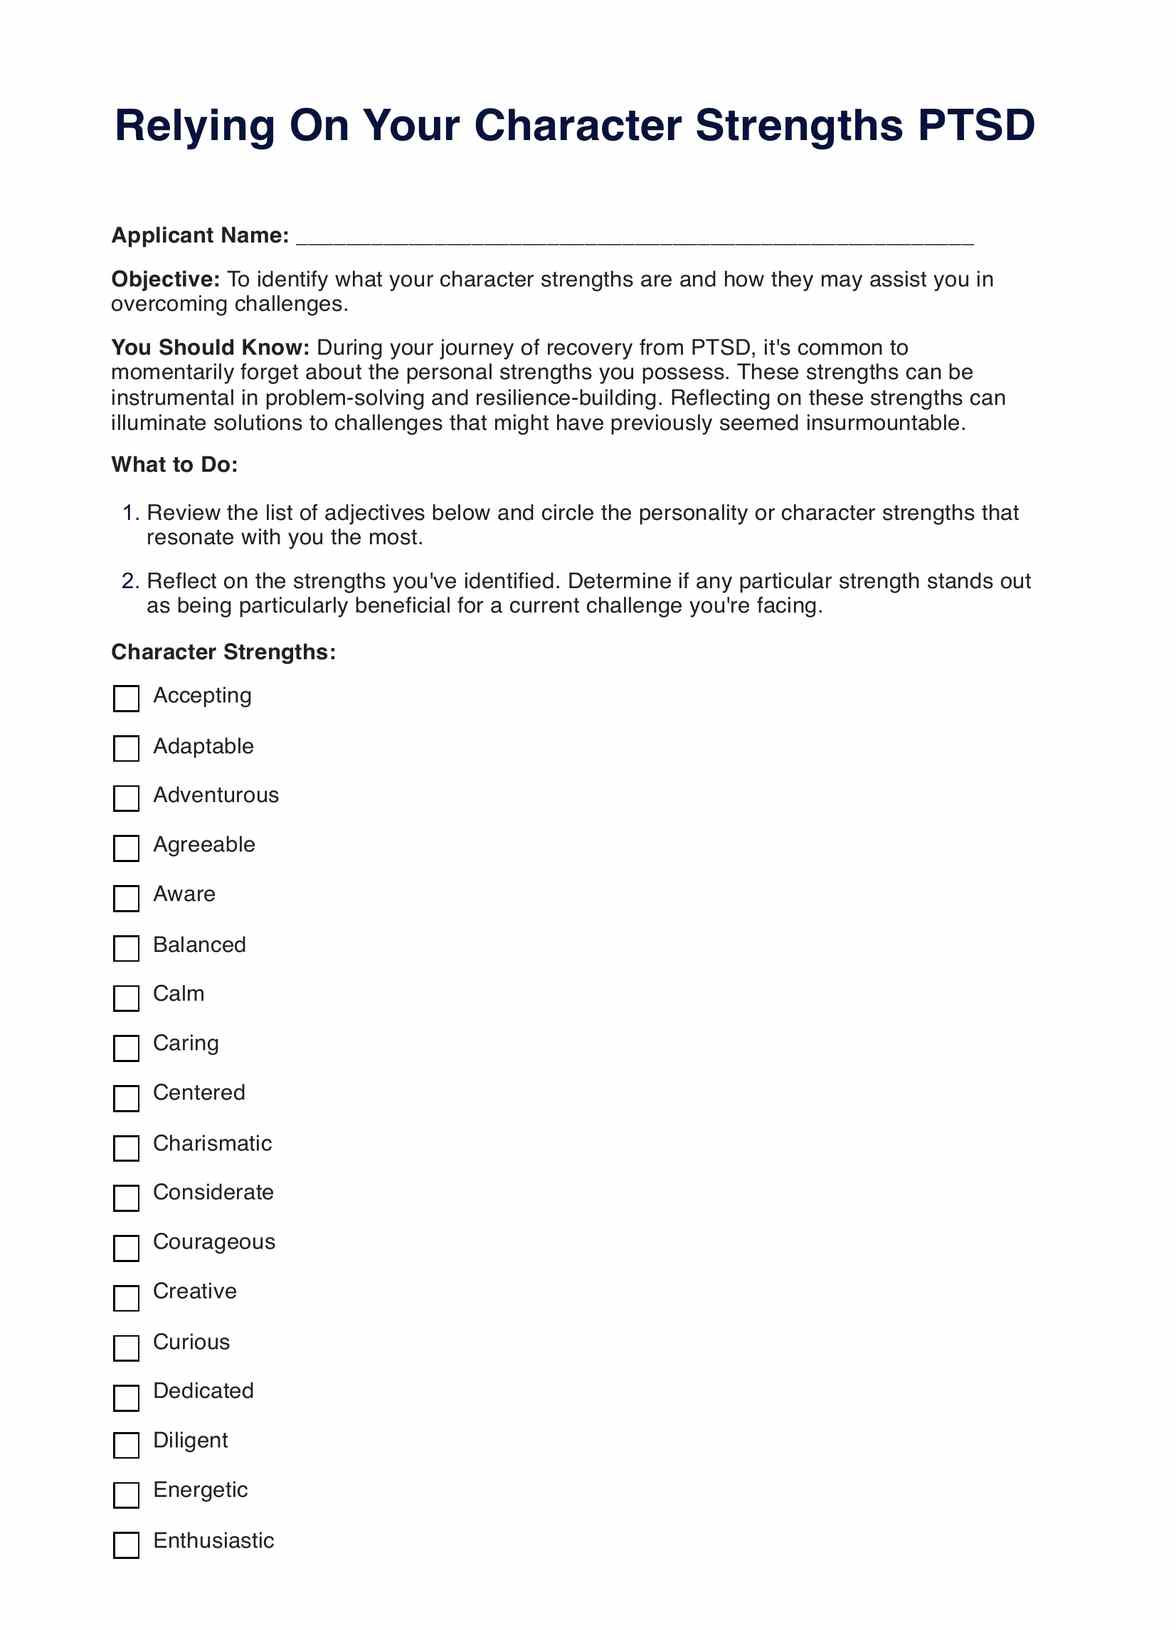 Relying On Your Character Strengths PTSD Worksheet PDF Example